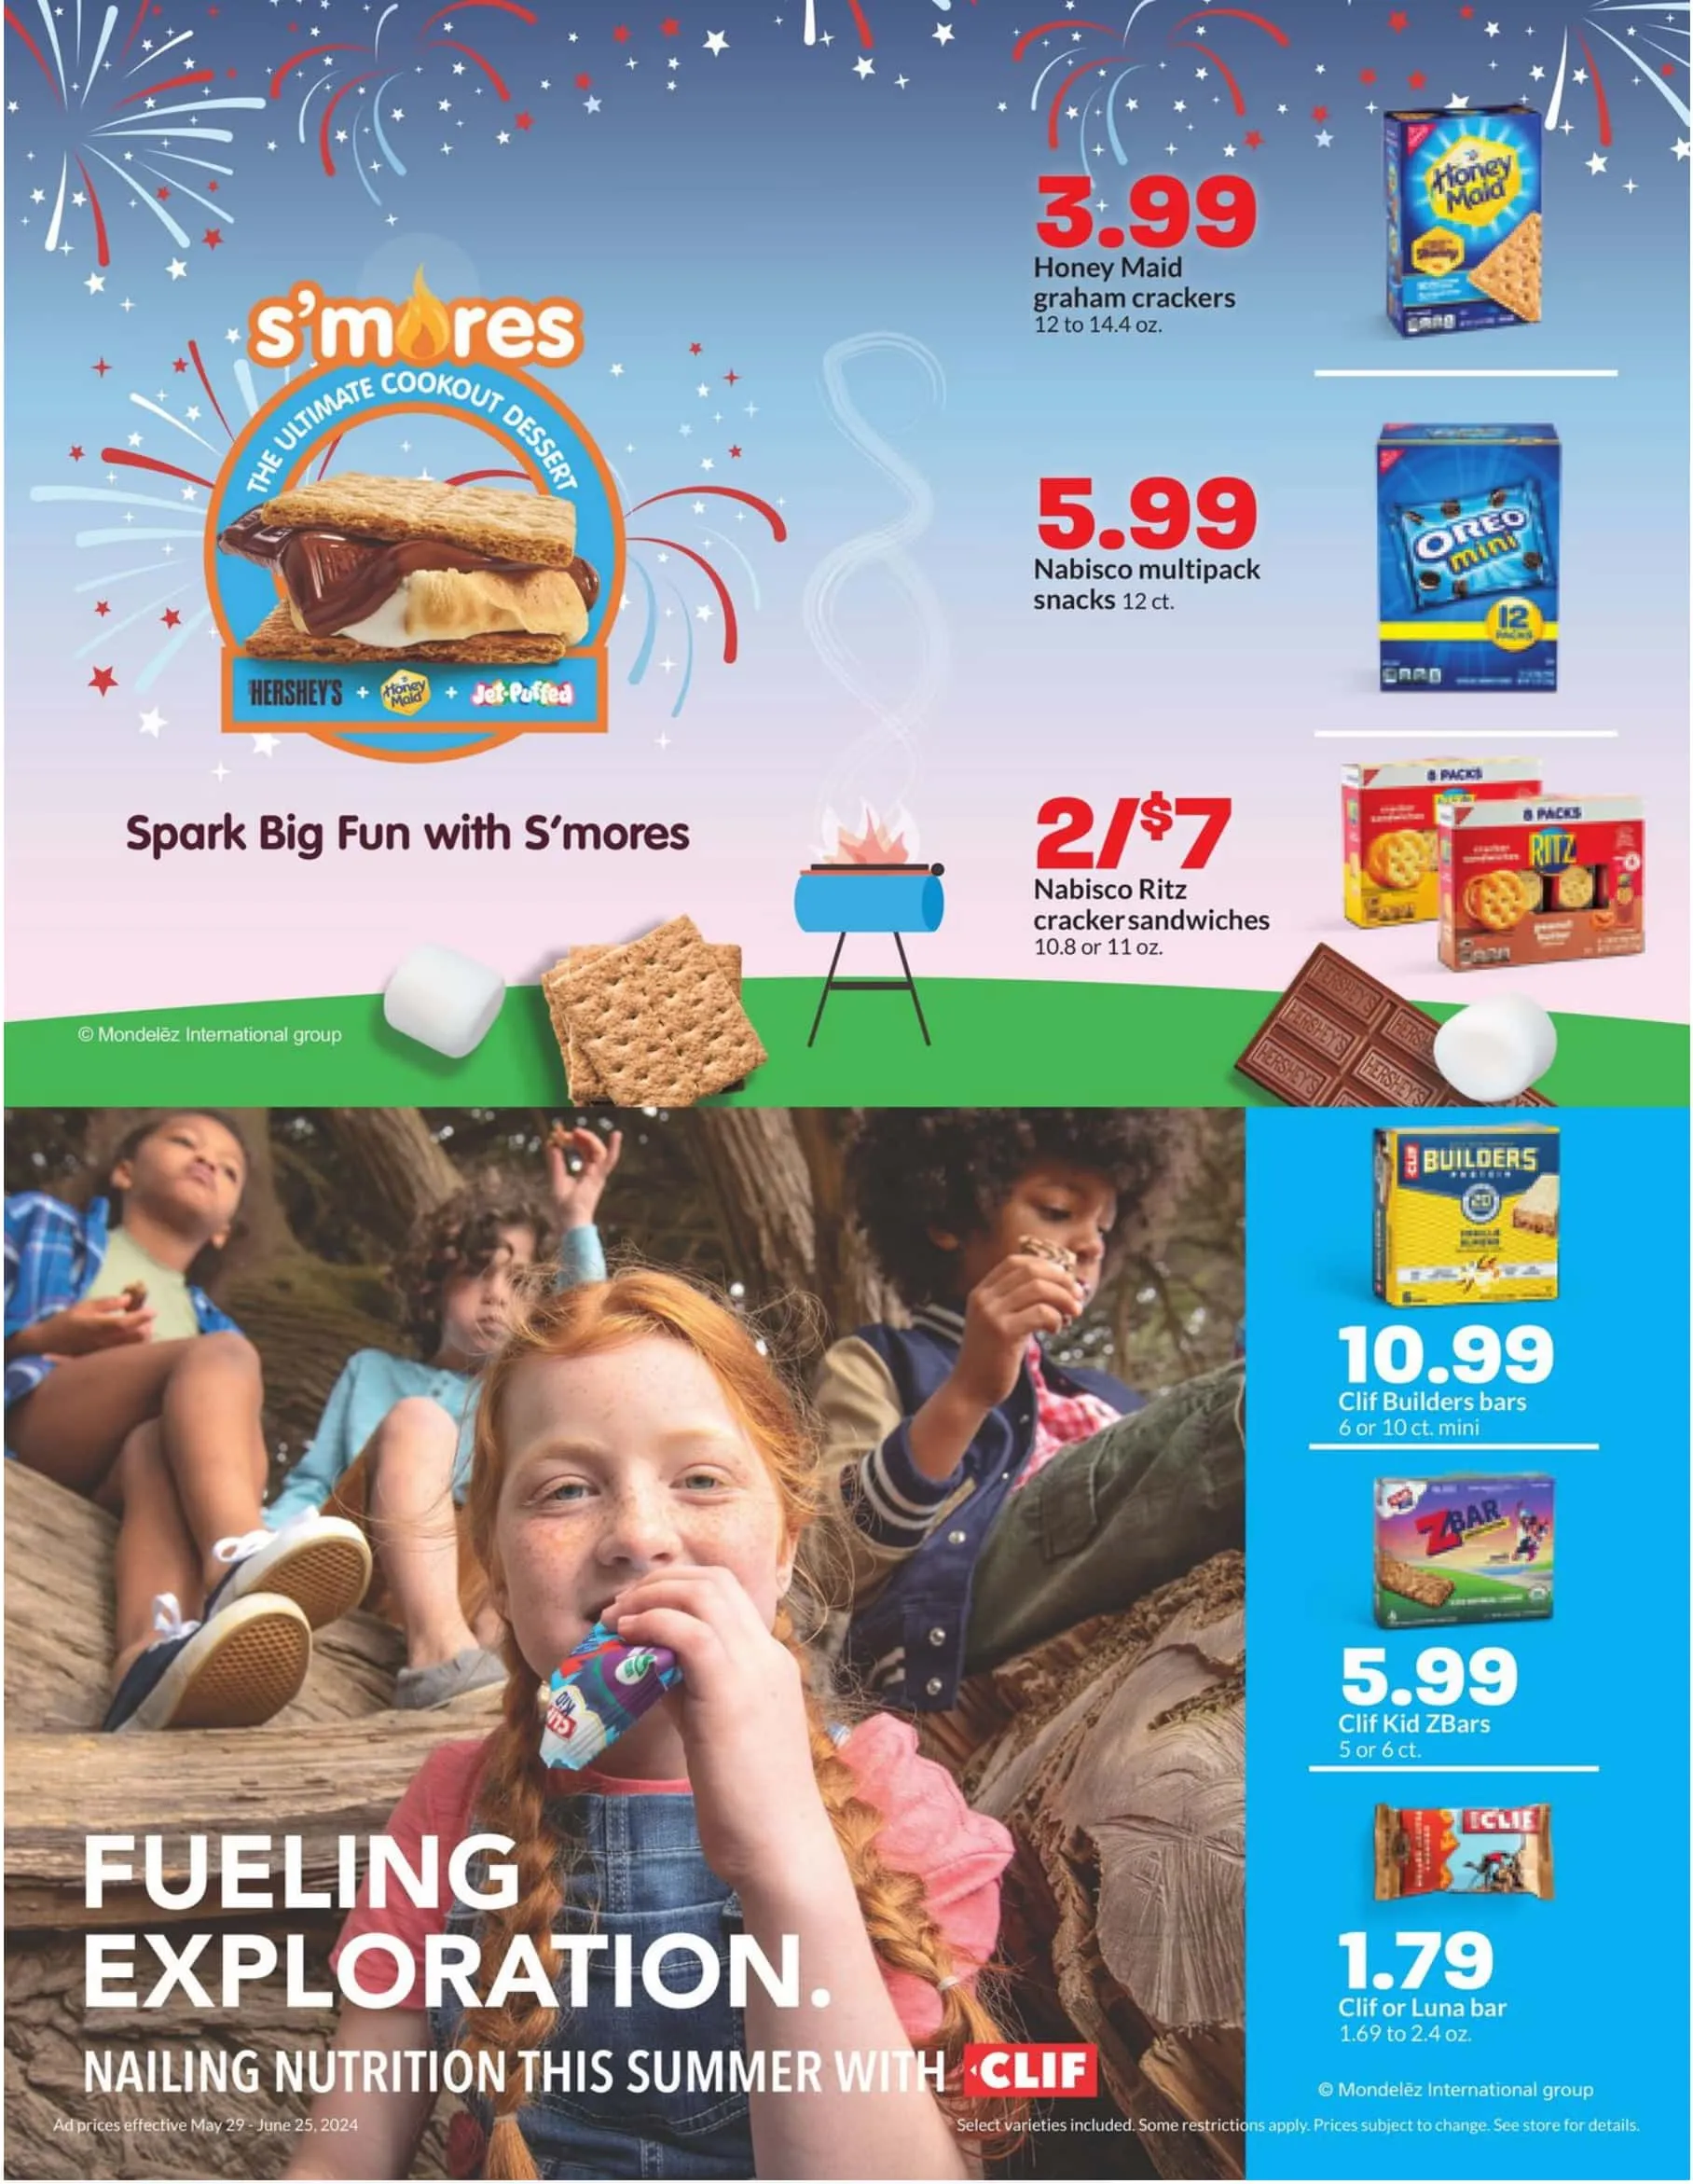 Hy-Vee July 2024 Weekly Sales, Deals, Discounts and Digital Coupons.